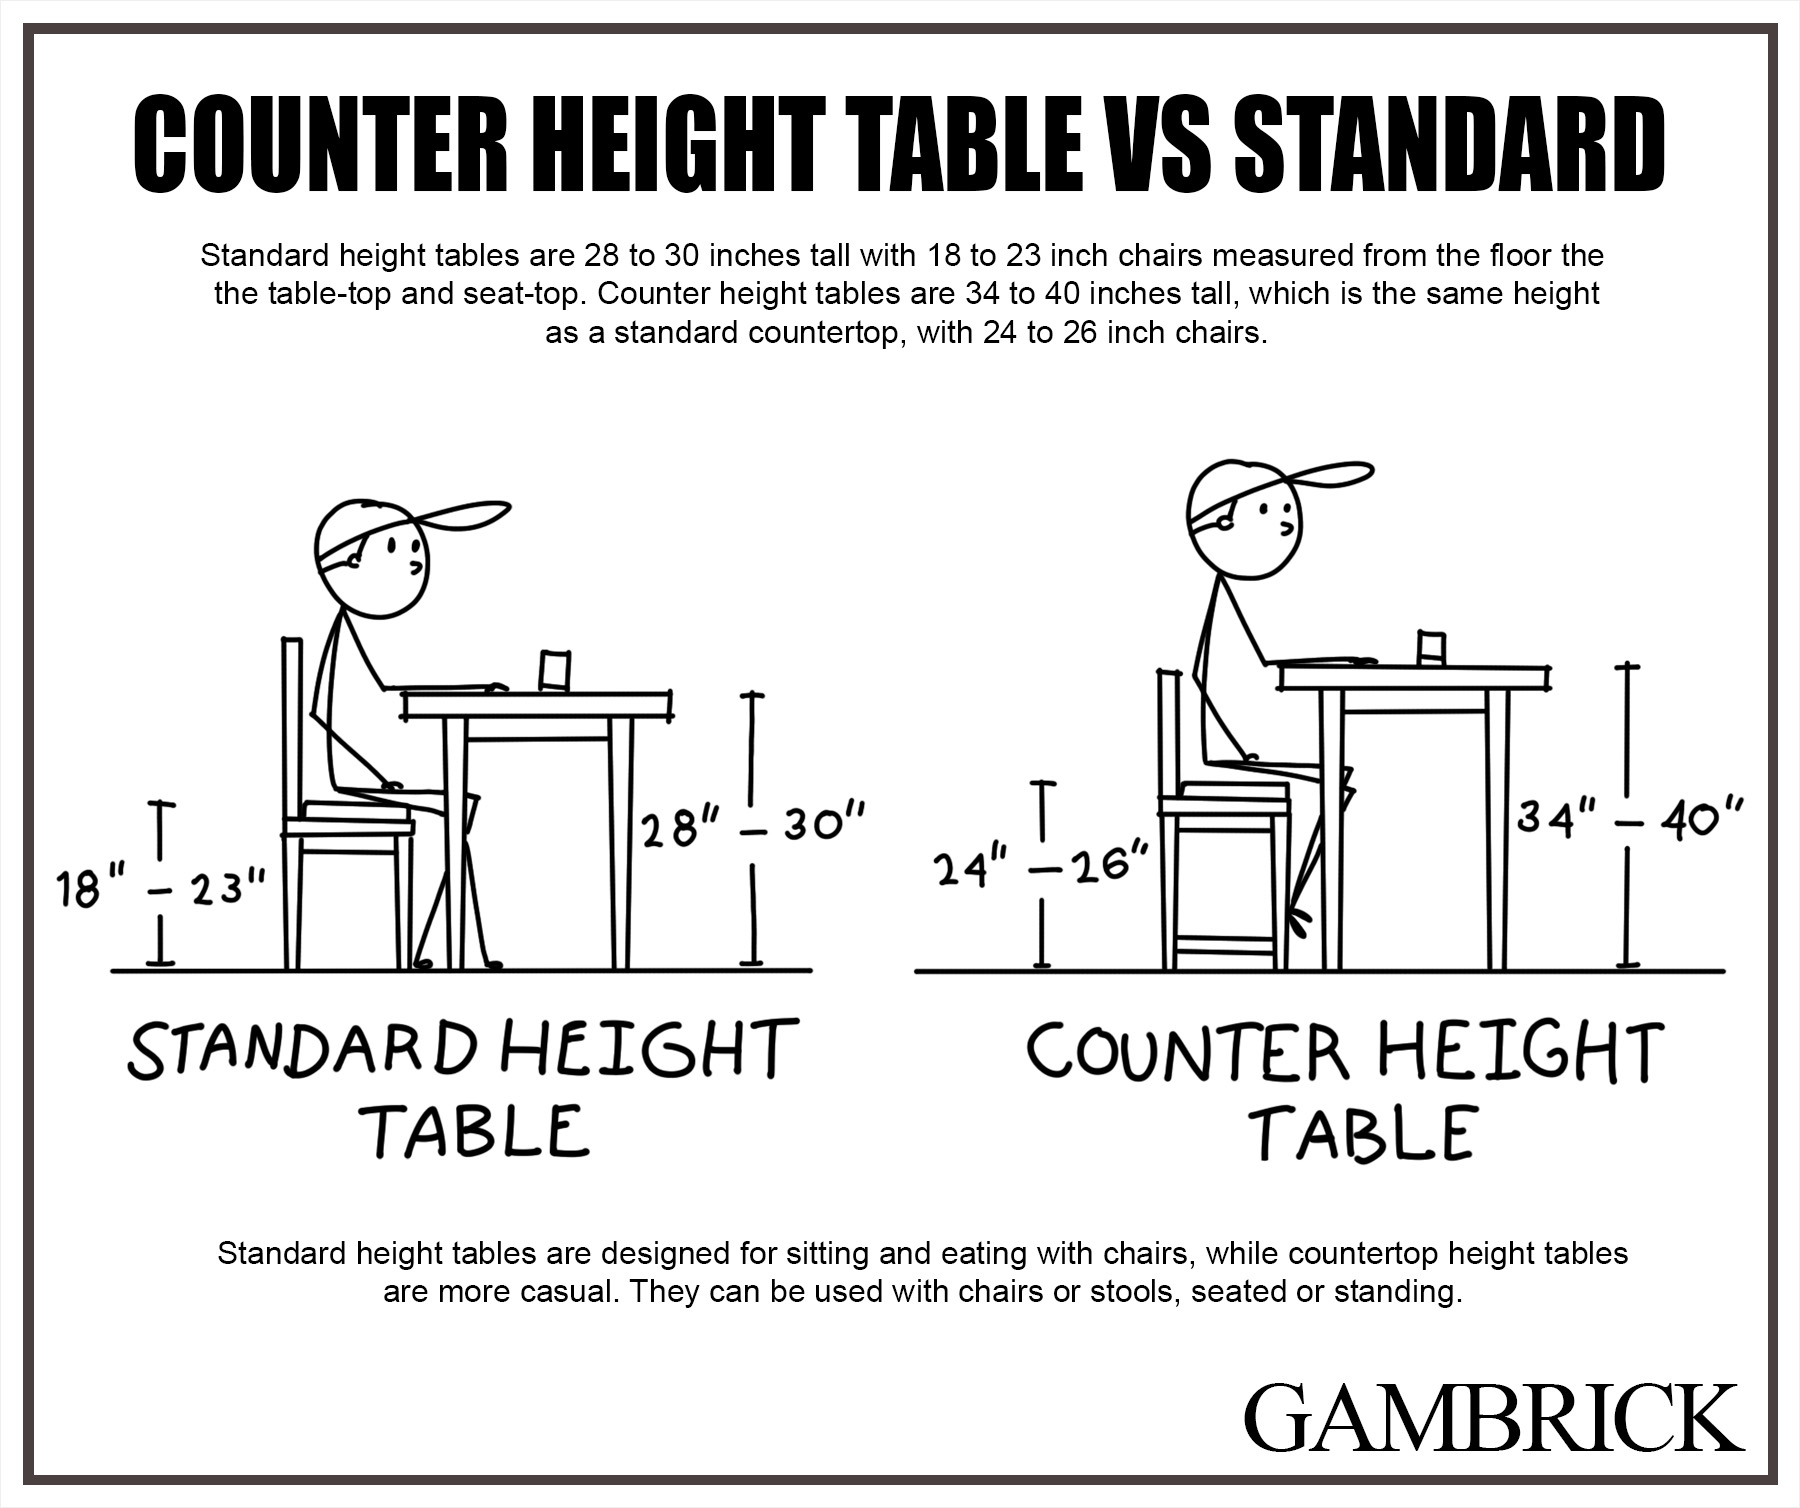 counter height table vs standard drawing 1.1